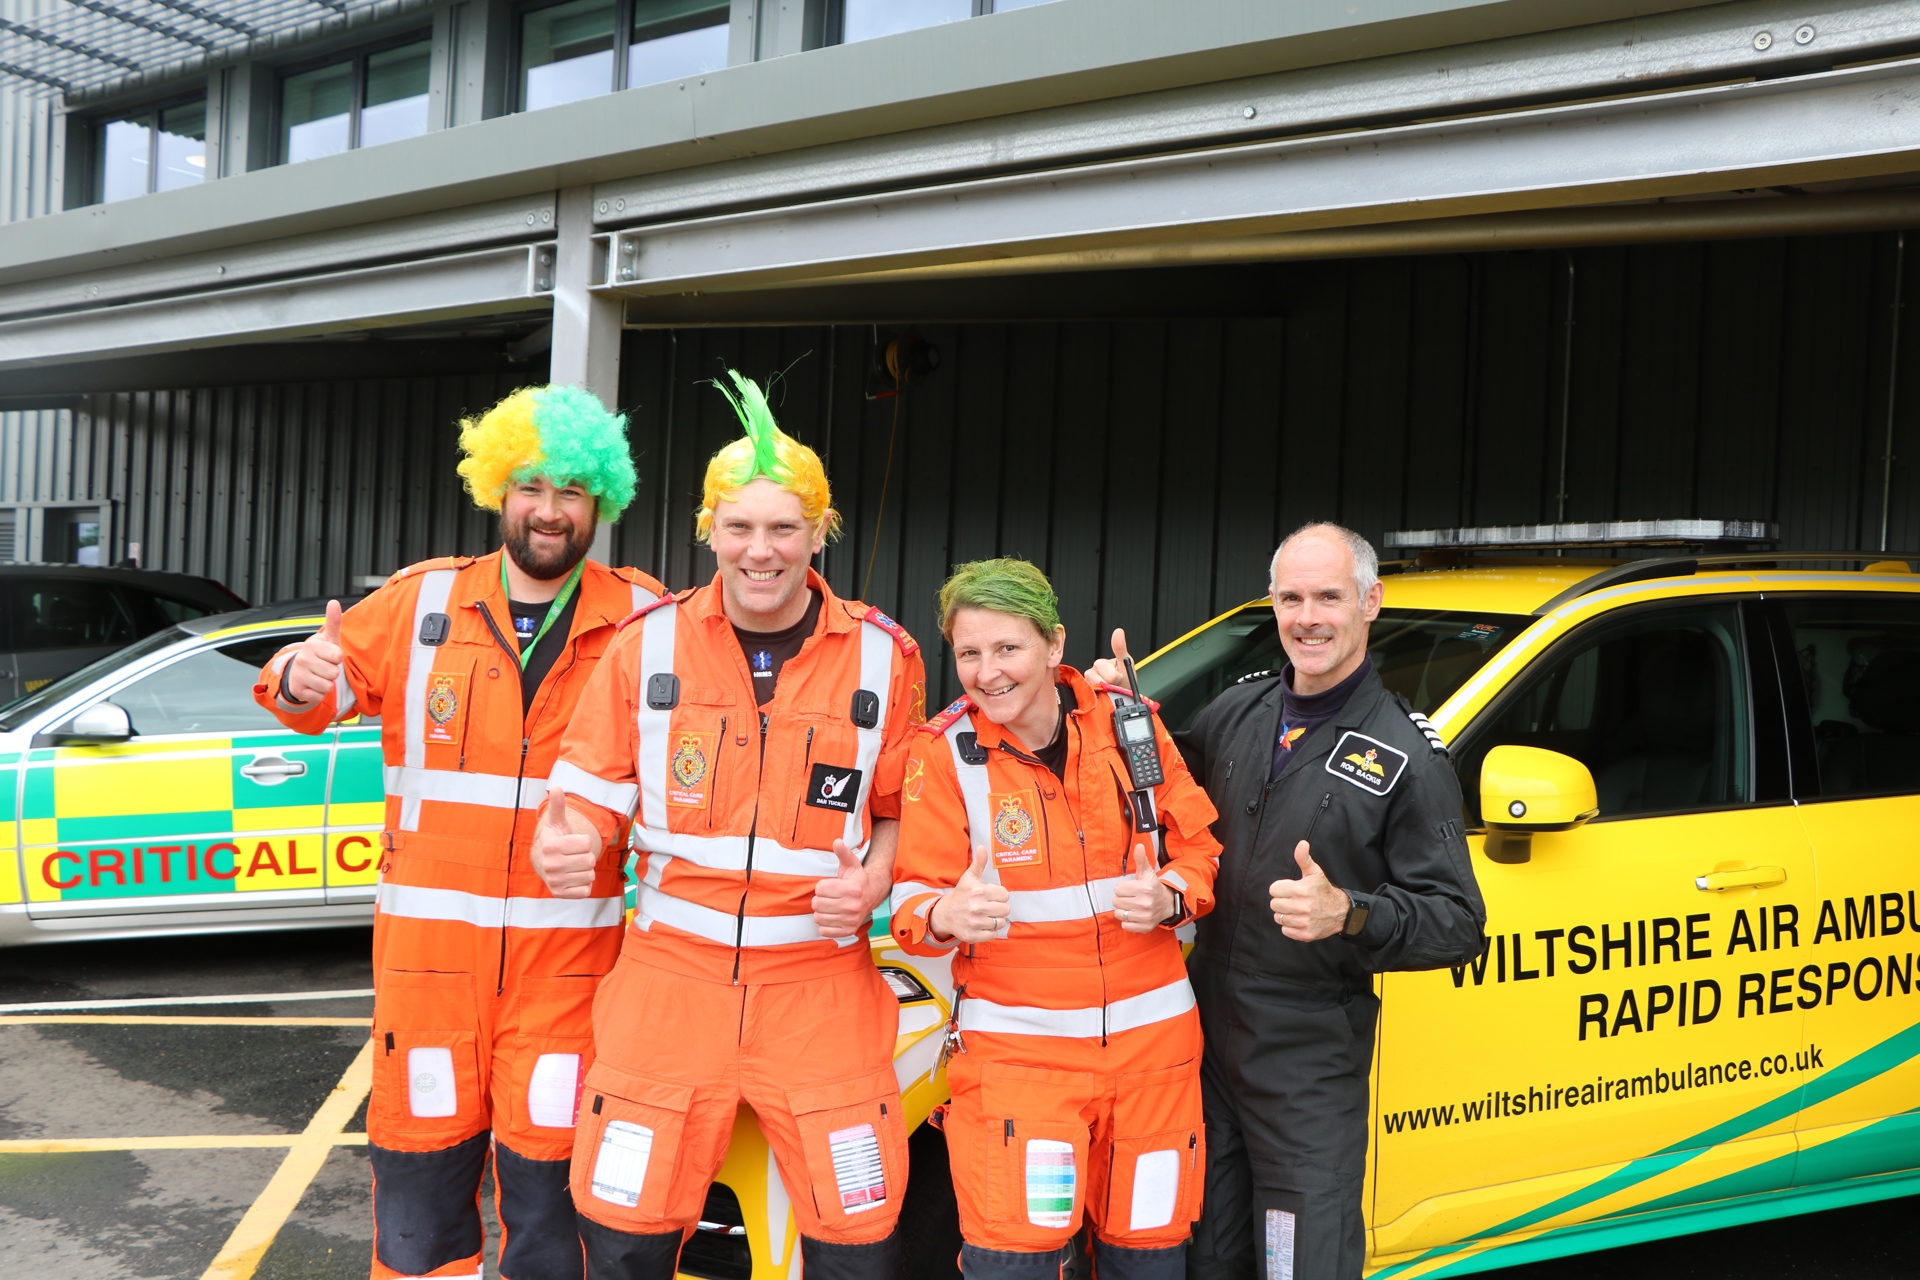 3 paramedics wearing orange flight suits, wearing yellow and green wigs, and a pilot wearing a black flight suit with their thumbs up